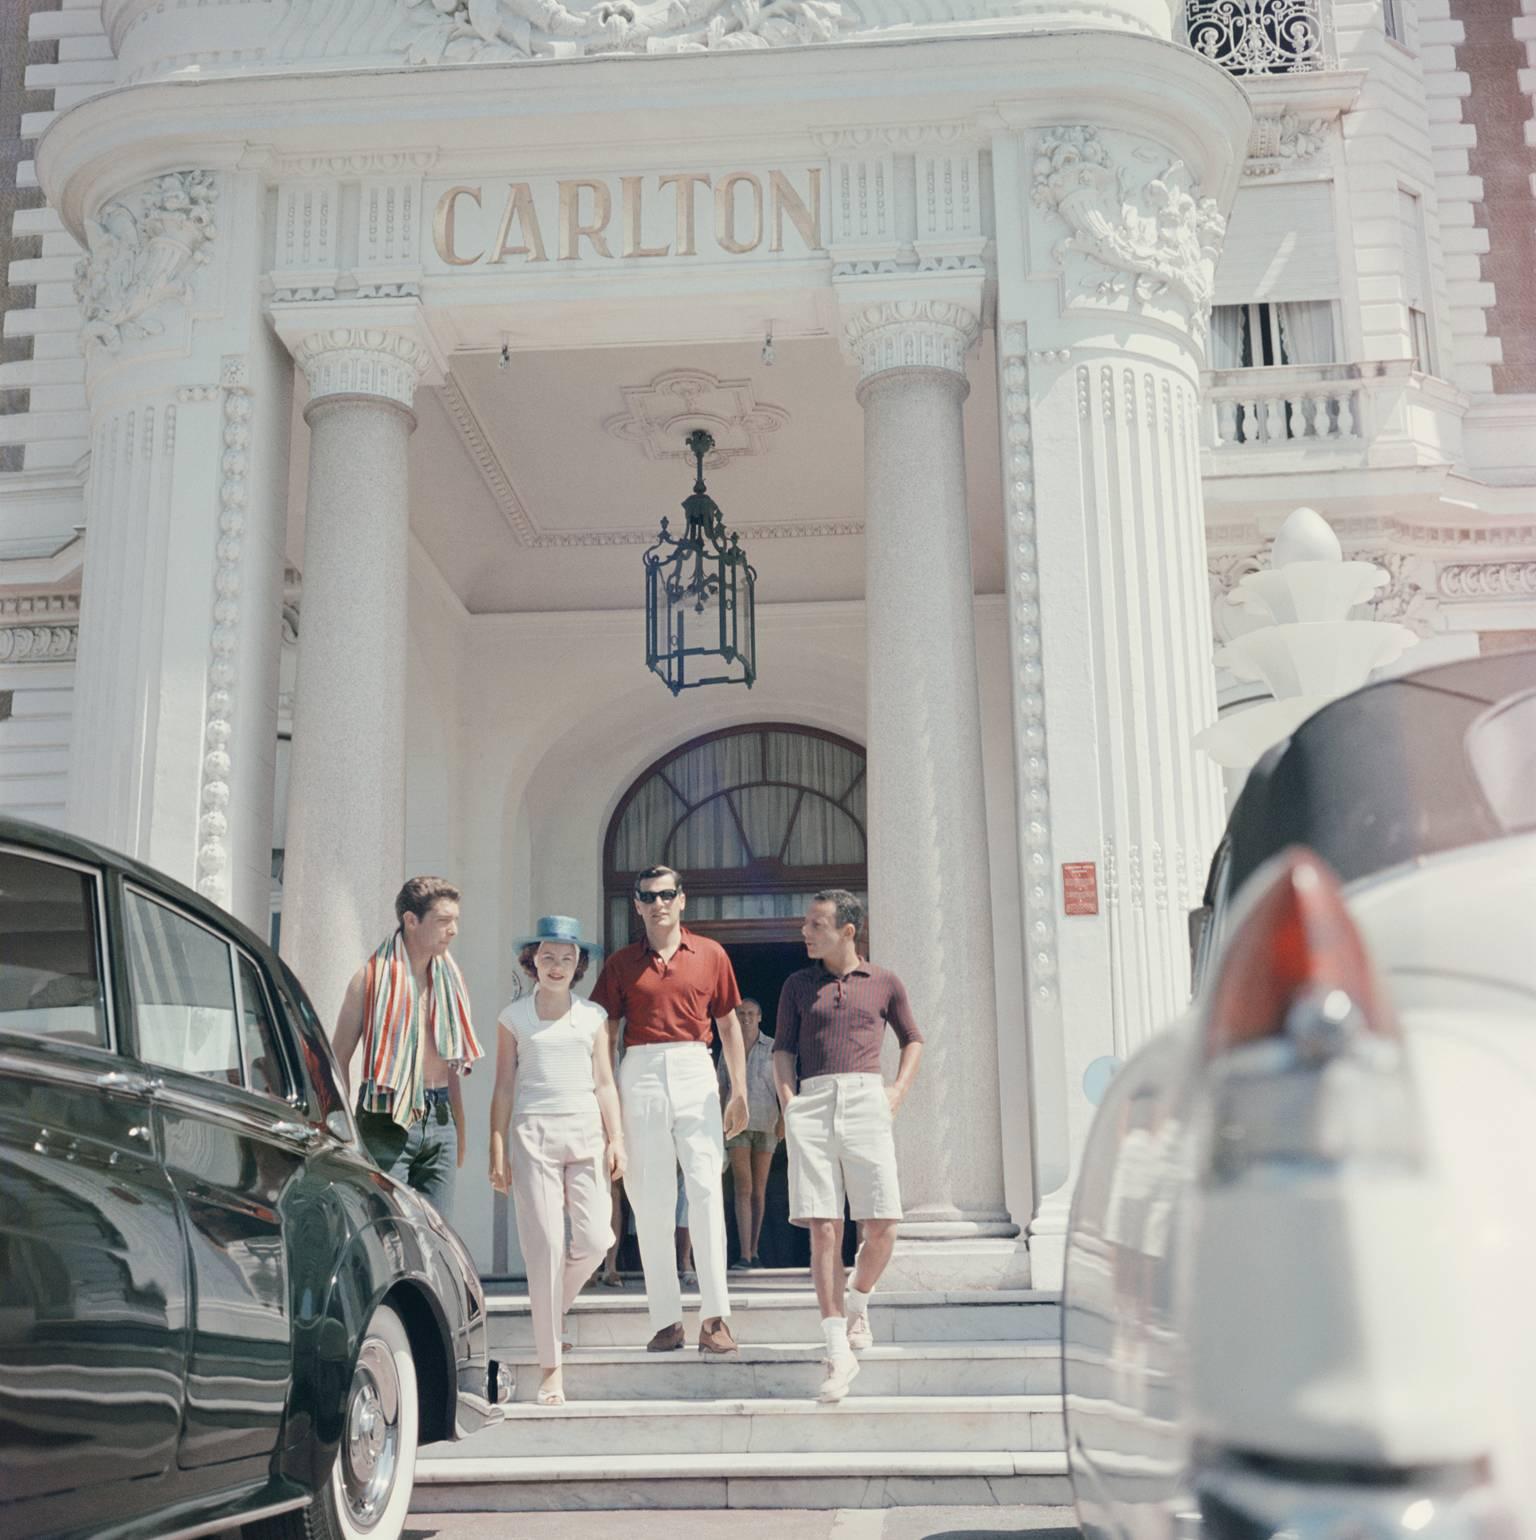 'Staying At The Carlton' by Slim Aarons

Guests at the entrance to the Carlton Hotel, Cannes, France, 1958.

This photograph epitomises the travel style and glamour of the period's wealthy and famous, beautifully documented by Aarons.

In his words,